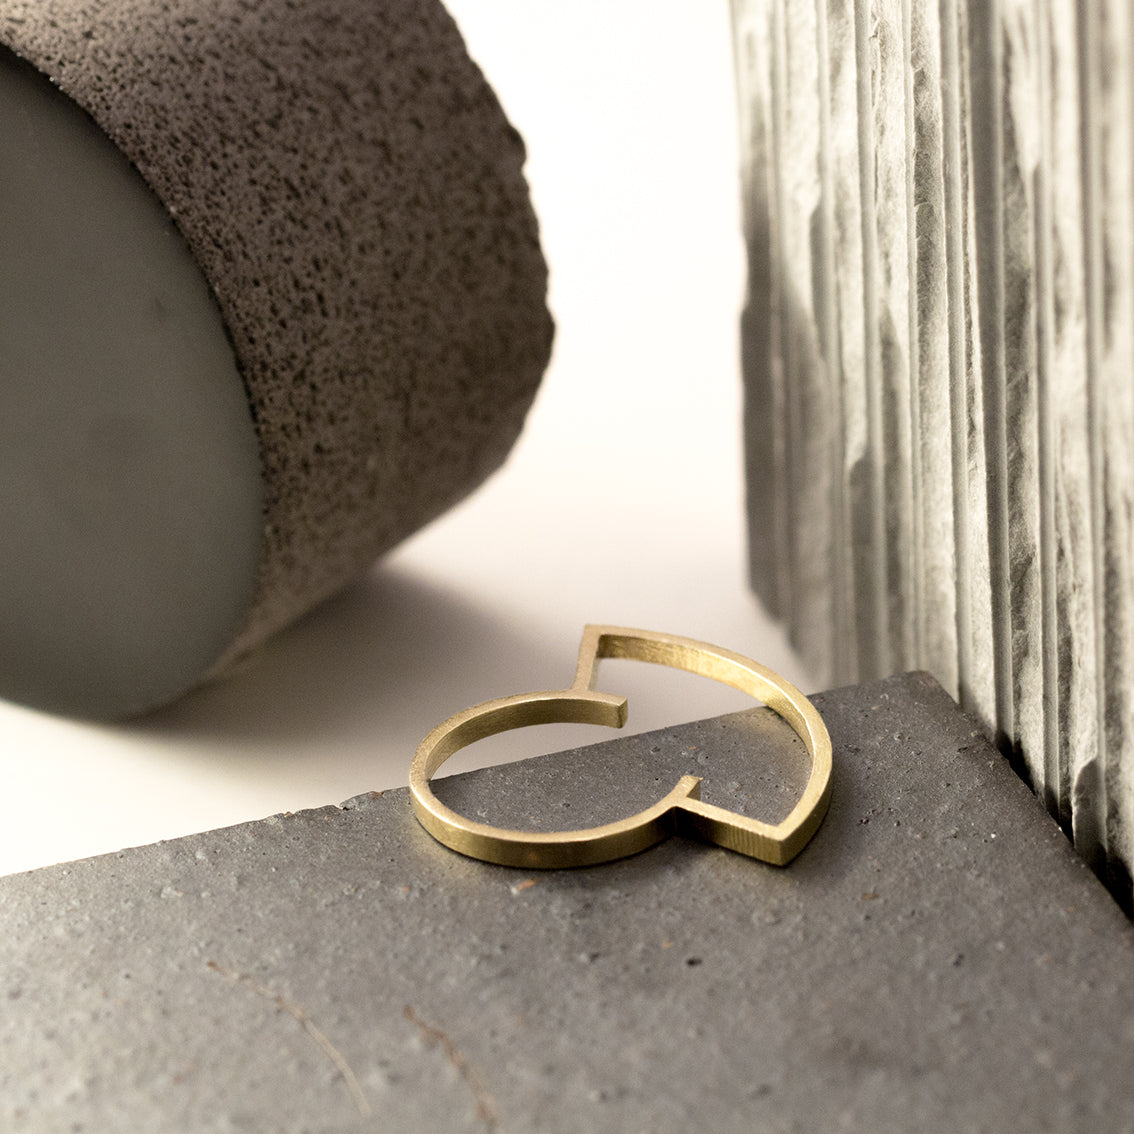 A brass ring which is designed as a silhouette and has a very thin band. It's very light, contemporary, playful yet an elegant design. It’s sitting among architectural materials including grey stone, concrete, lava stone. 